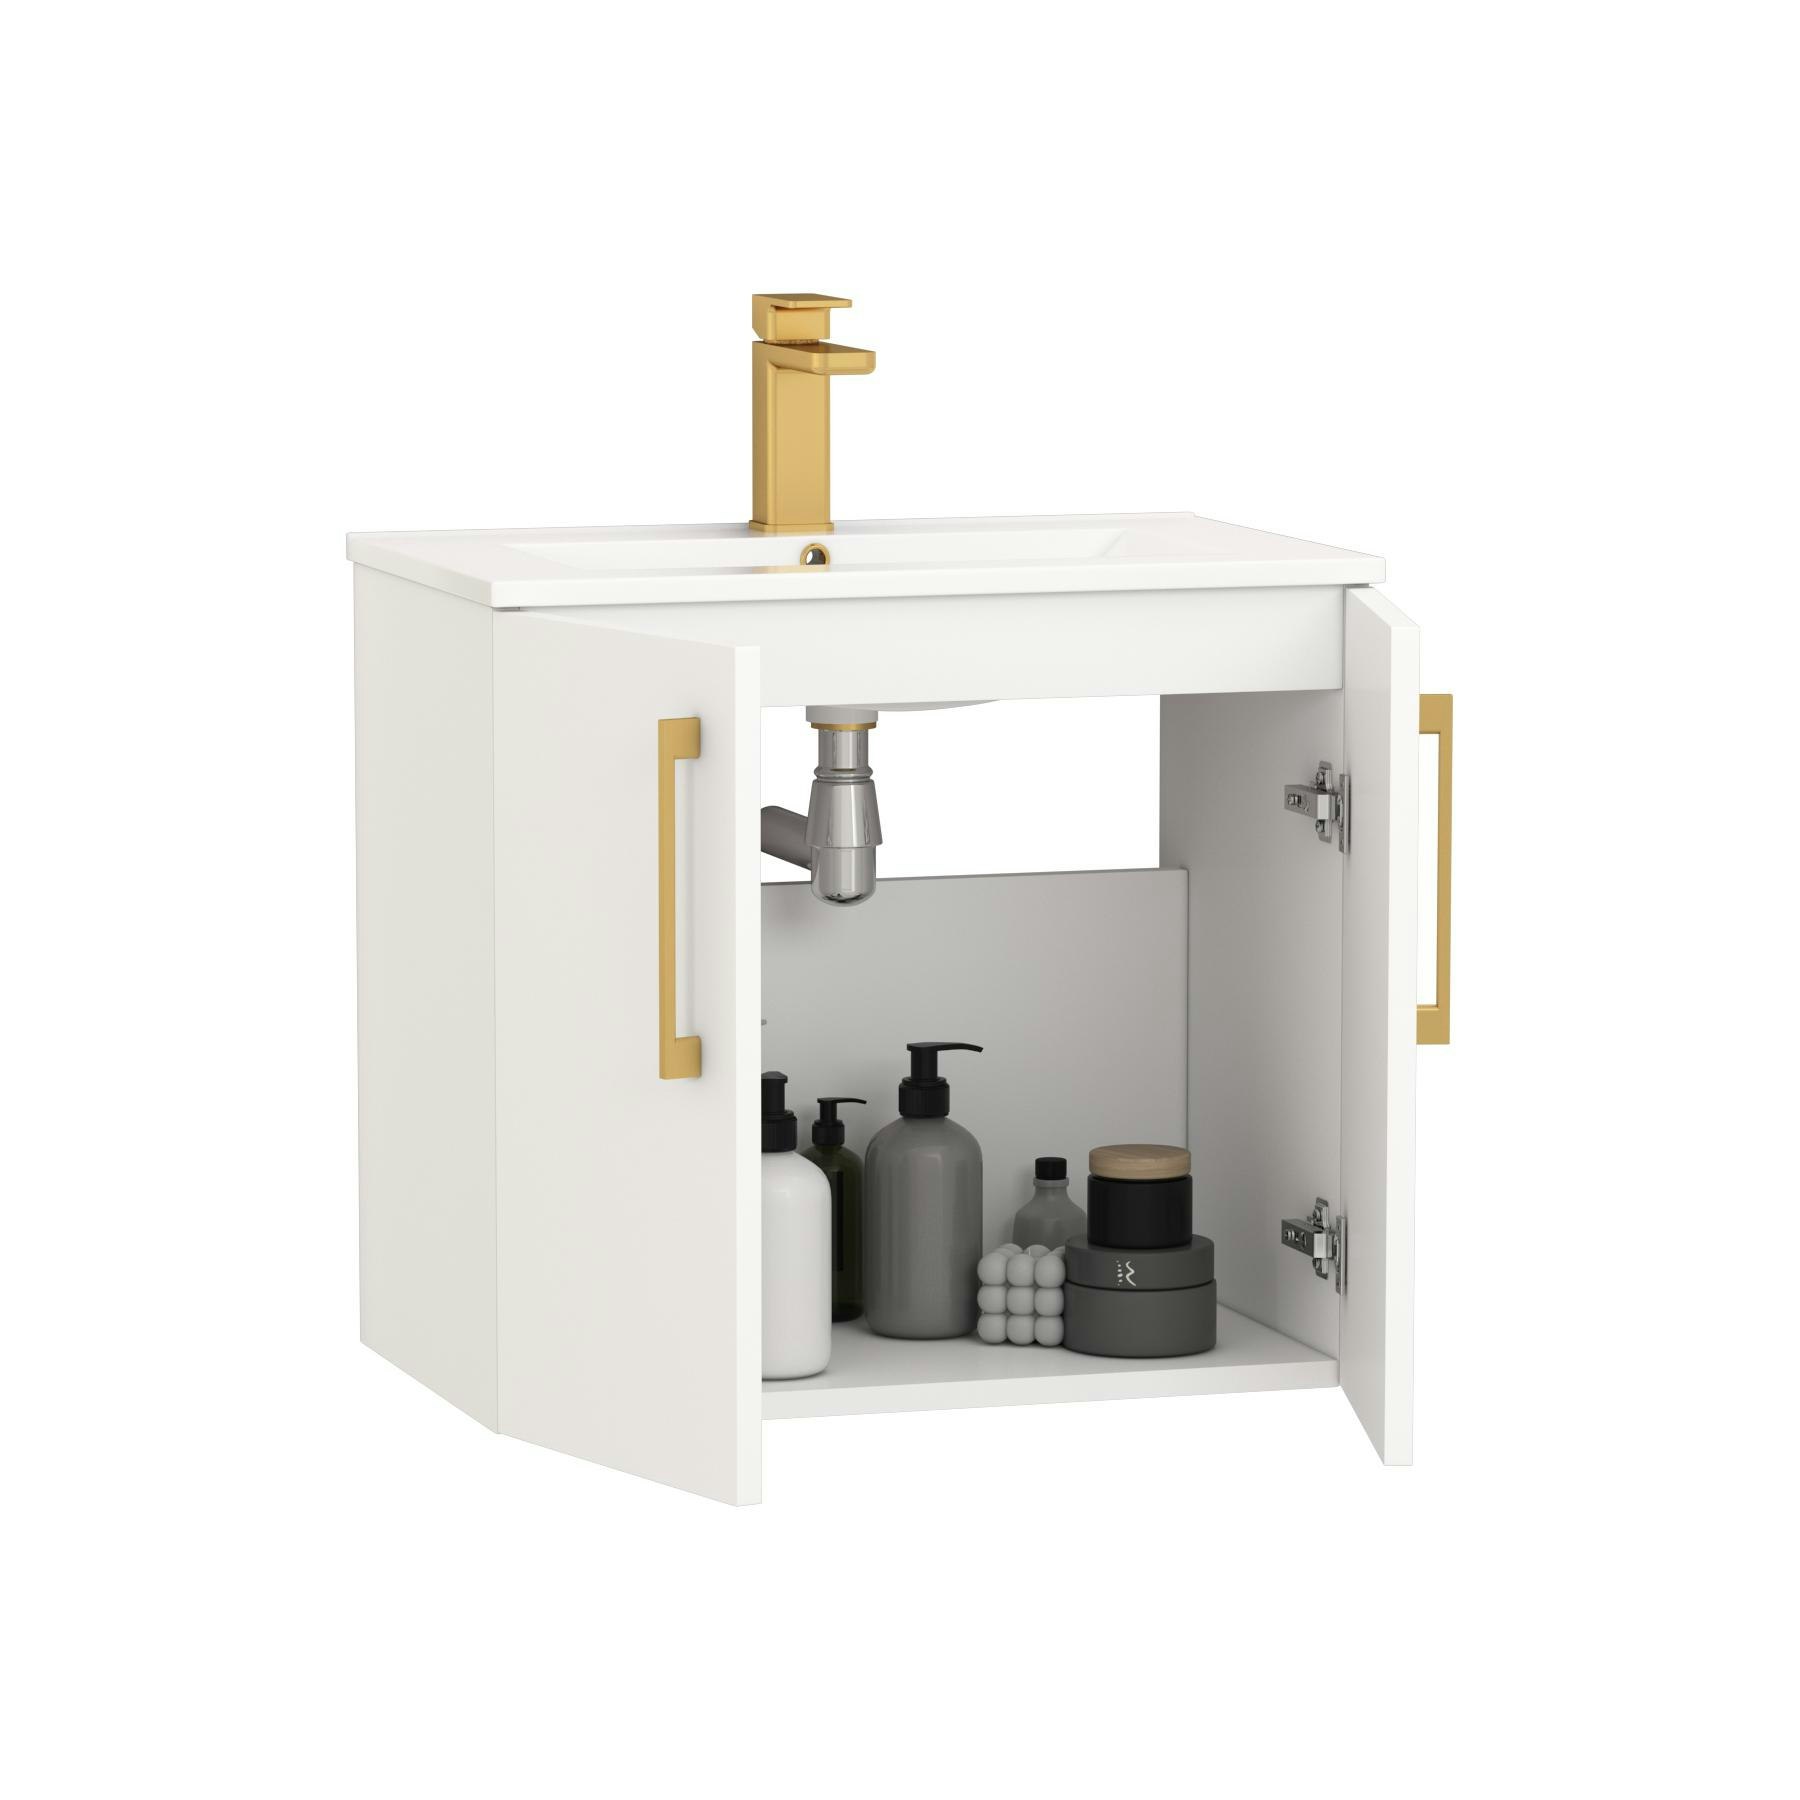 Modena 800mm Satin White Wall Hung Vanity Unit 2 Door Minimalist Basin With Brushed Brass Handle